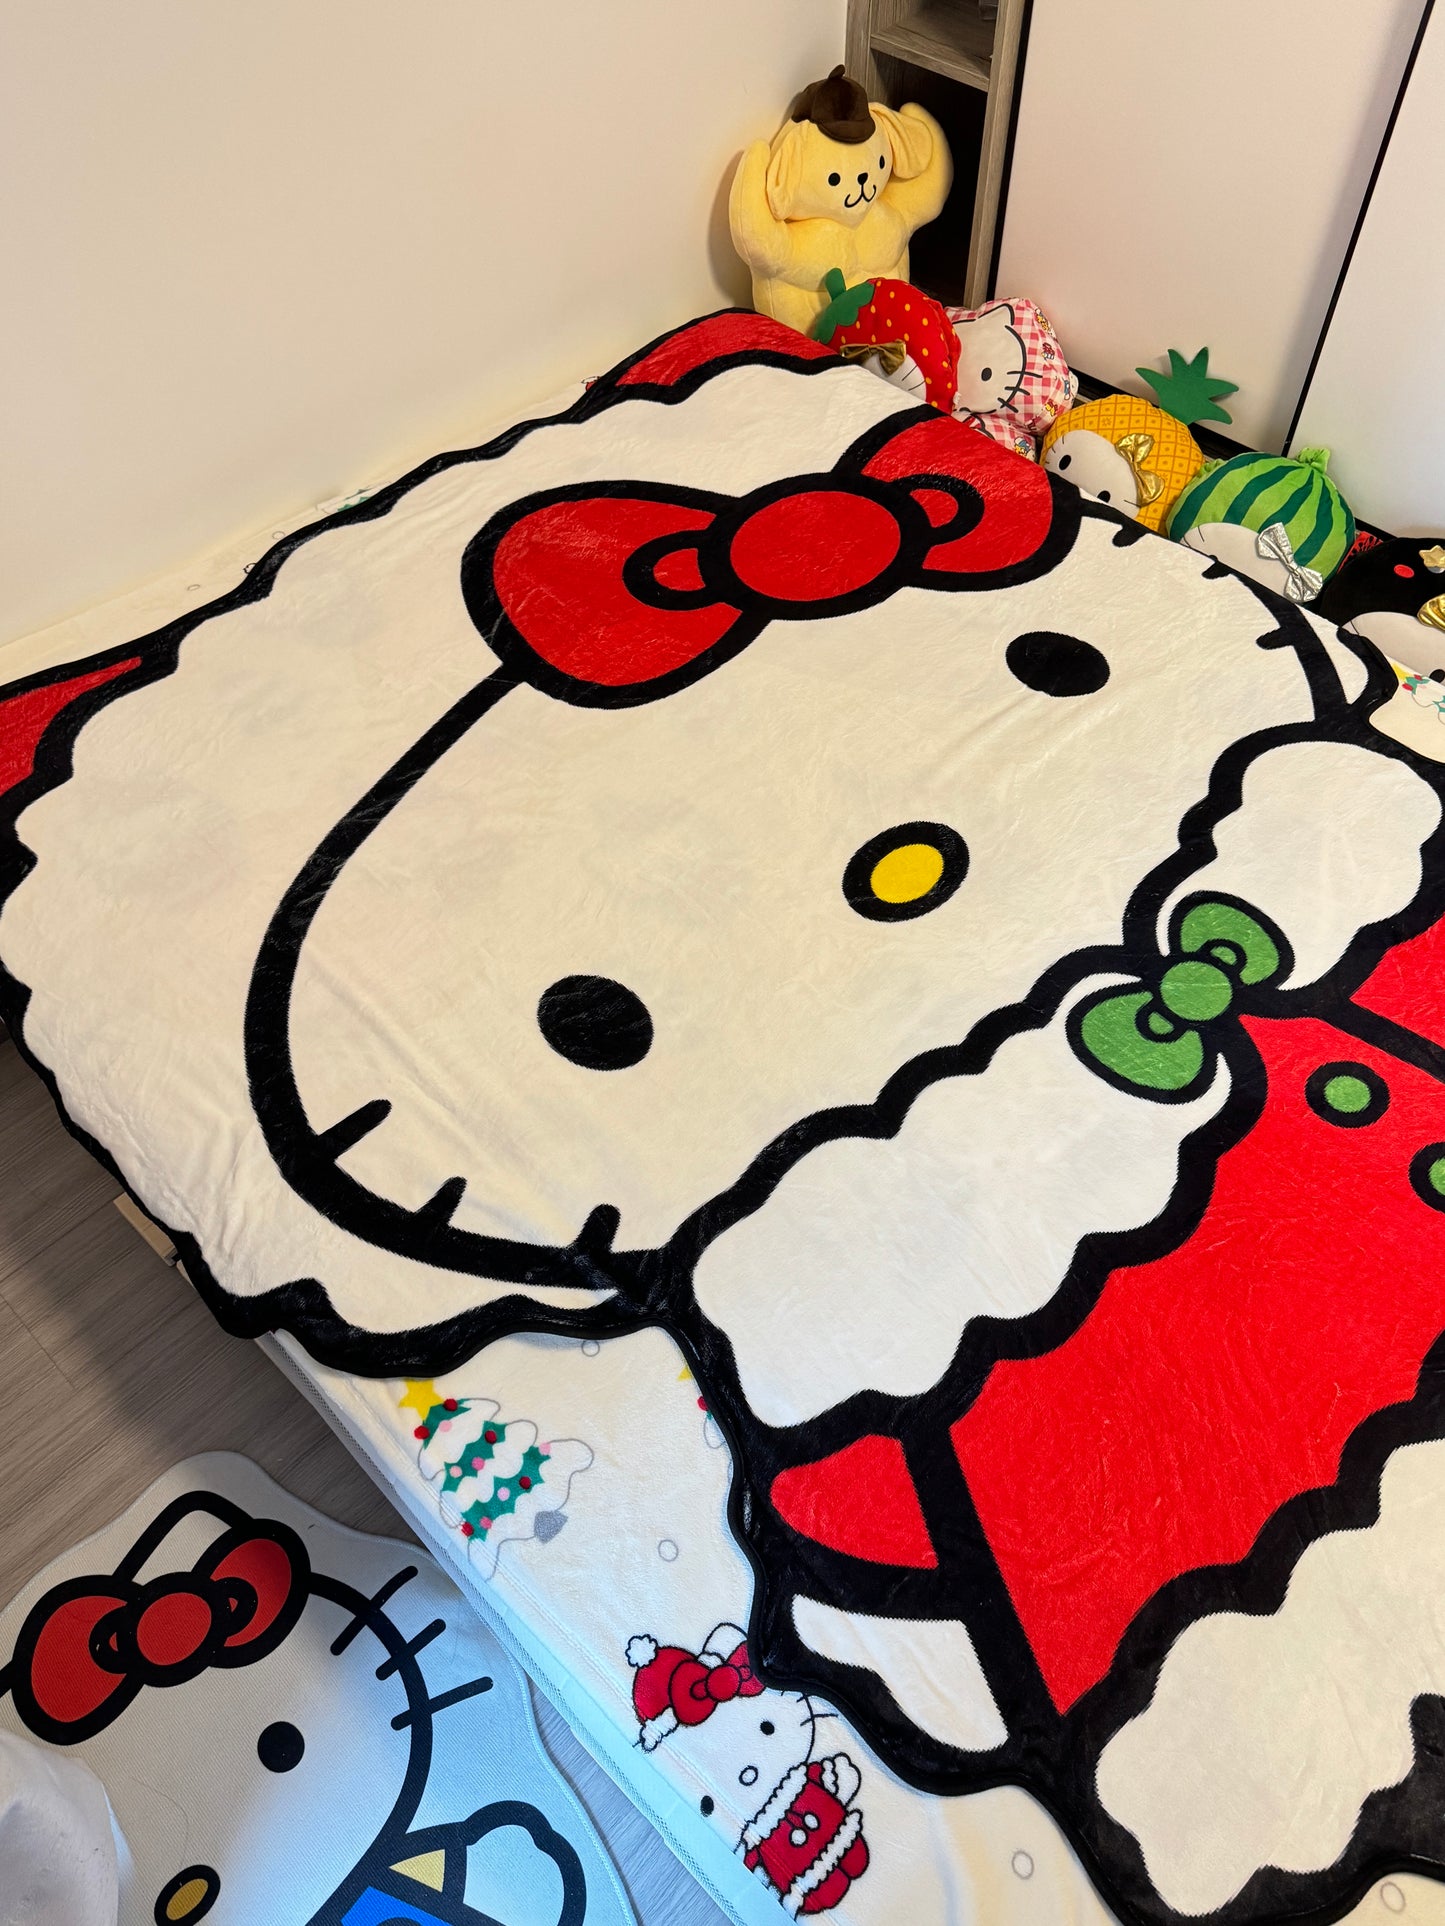 Hellokitty Shape Christmas Blanket Flannel Throw Blanket Cute Blanket Lightweight Soft Cozy for Bed Kids Adult Womens Gifts for Christmas |Thicker Version